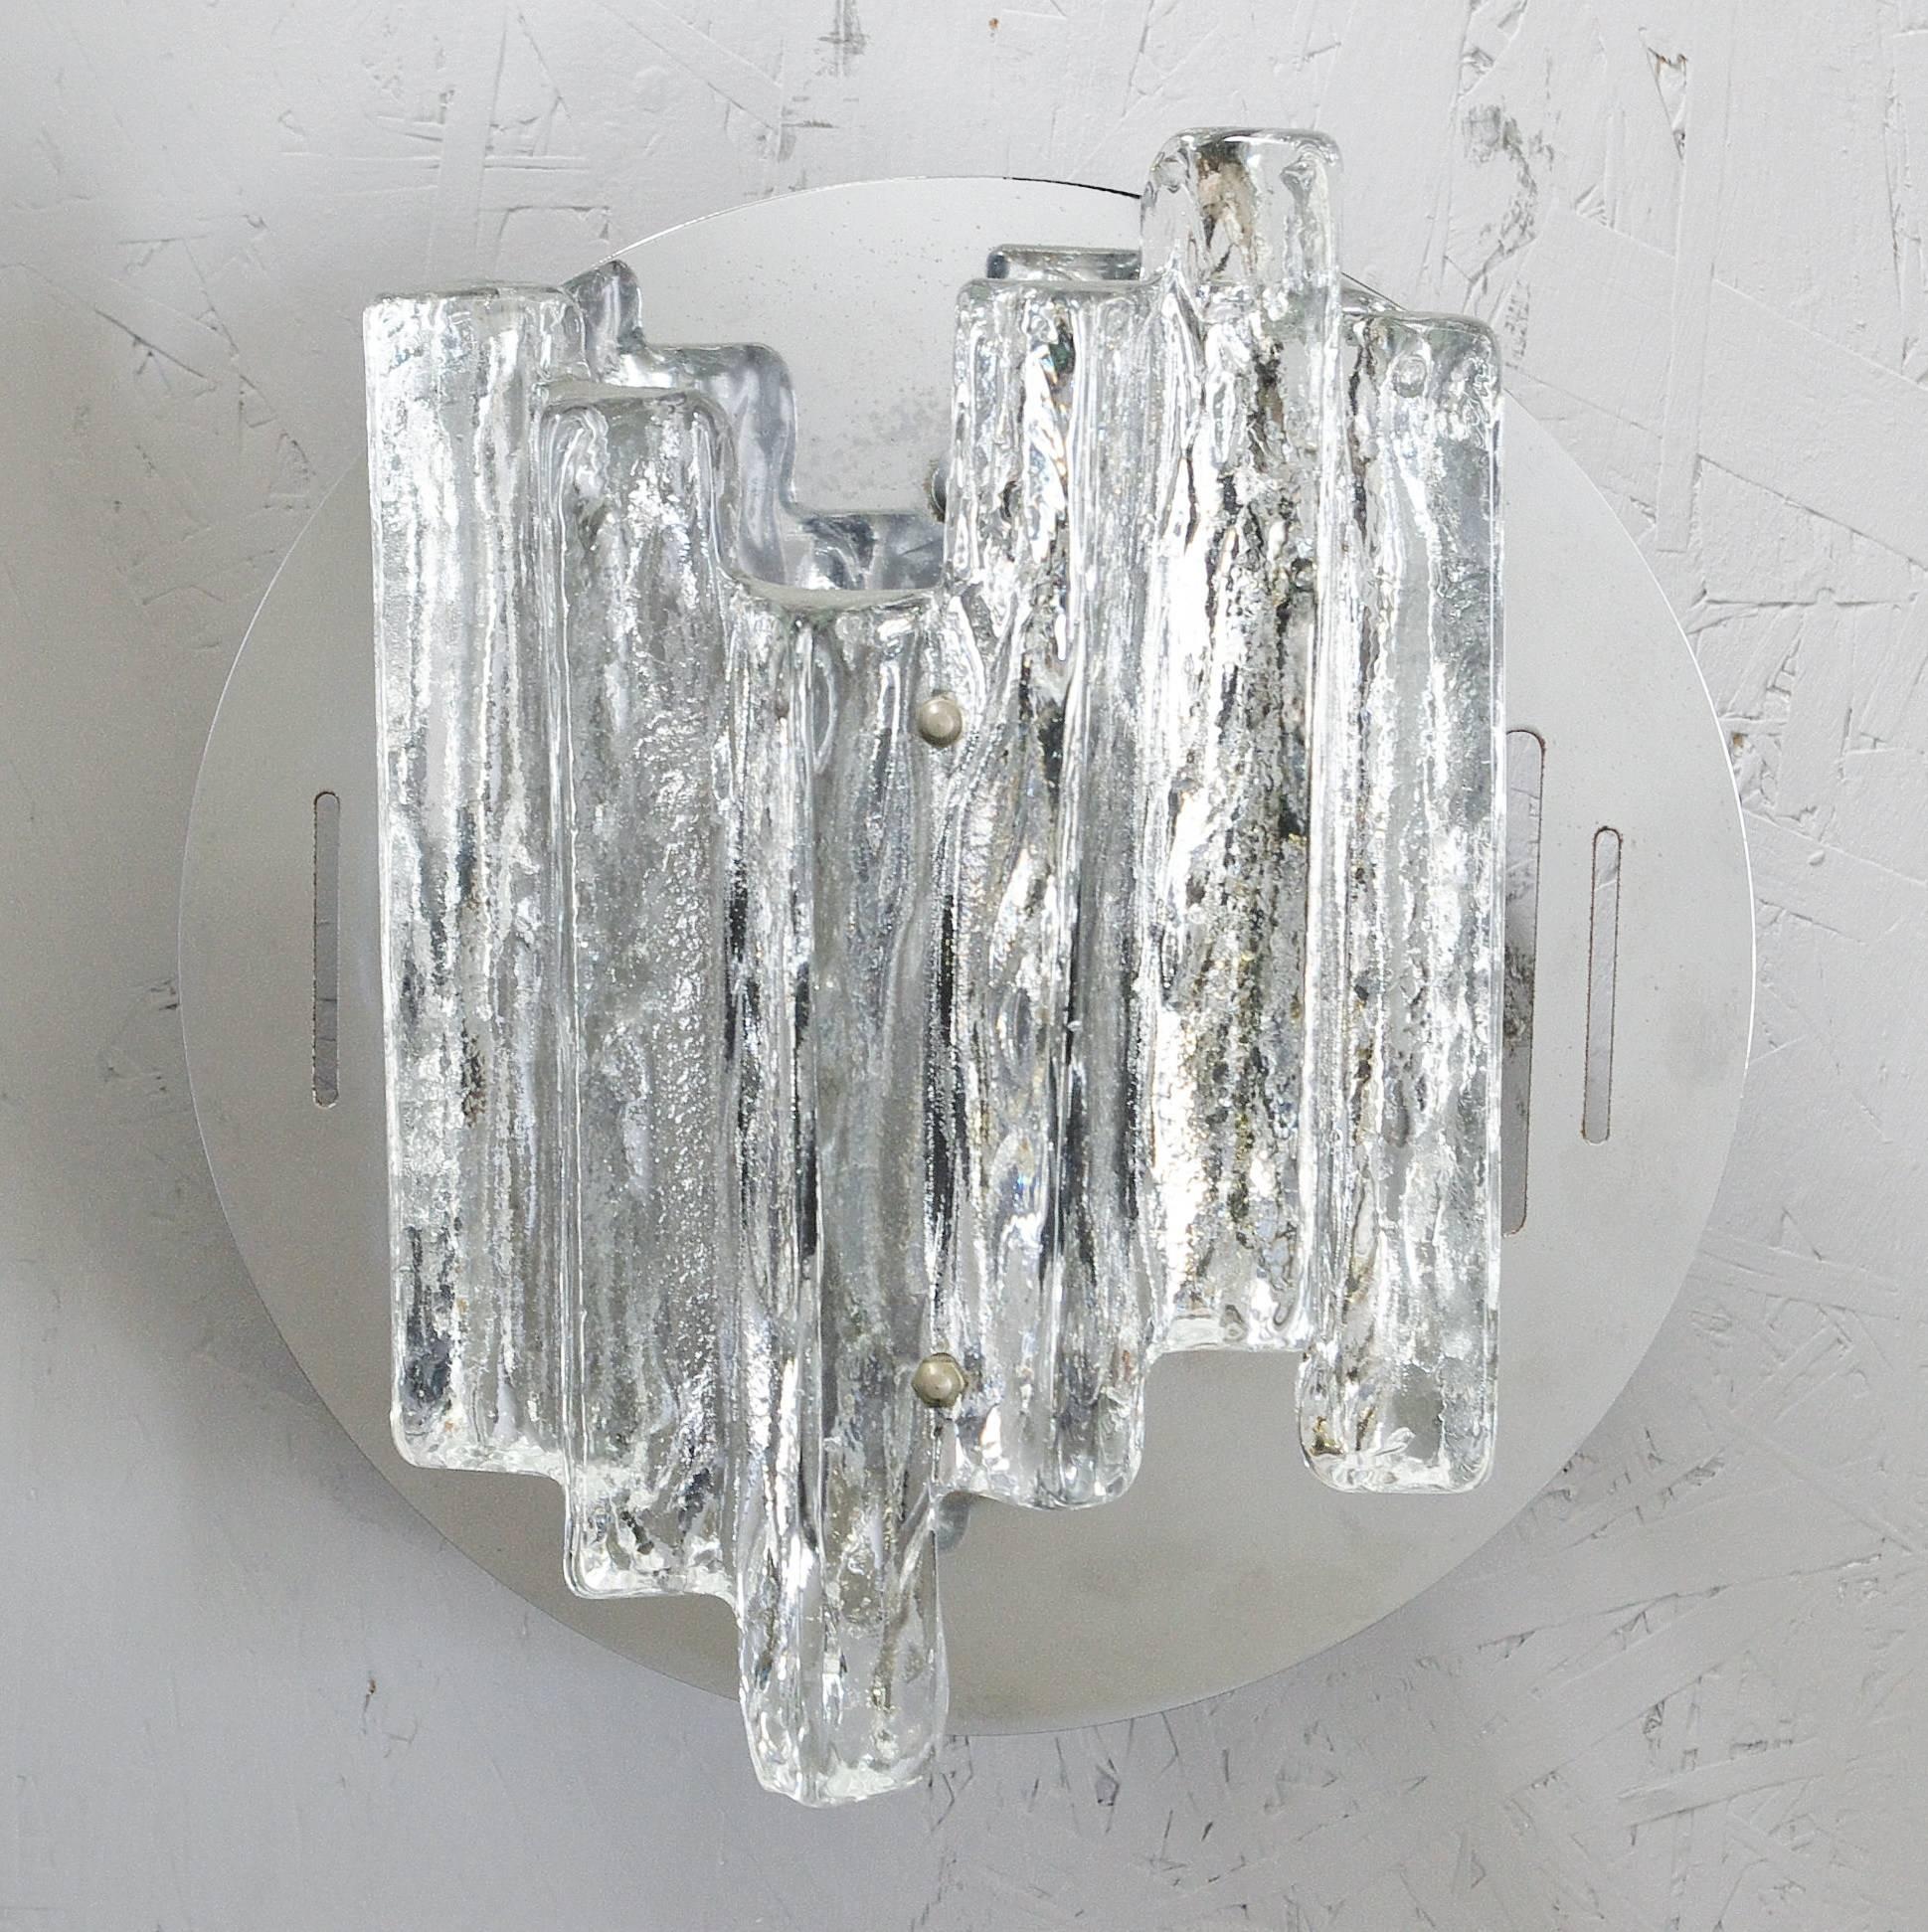 Set of 3 Italian wall lights with clear geometric Murano glass and chrome frame, by Salviati.
1 light / max 40W each
Depth: 8 inches / Width: 13 inches / Height: 11 inches
1 set of 3 in stock in Palm Springs currently ON 40% OFF SALE for $2,699